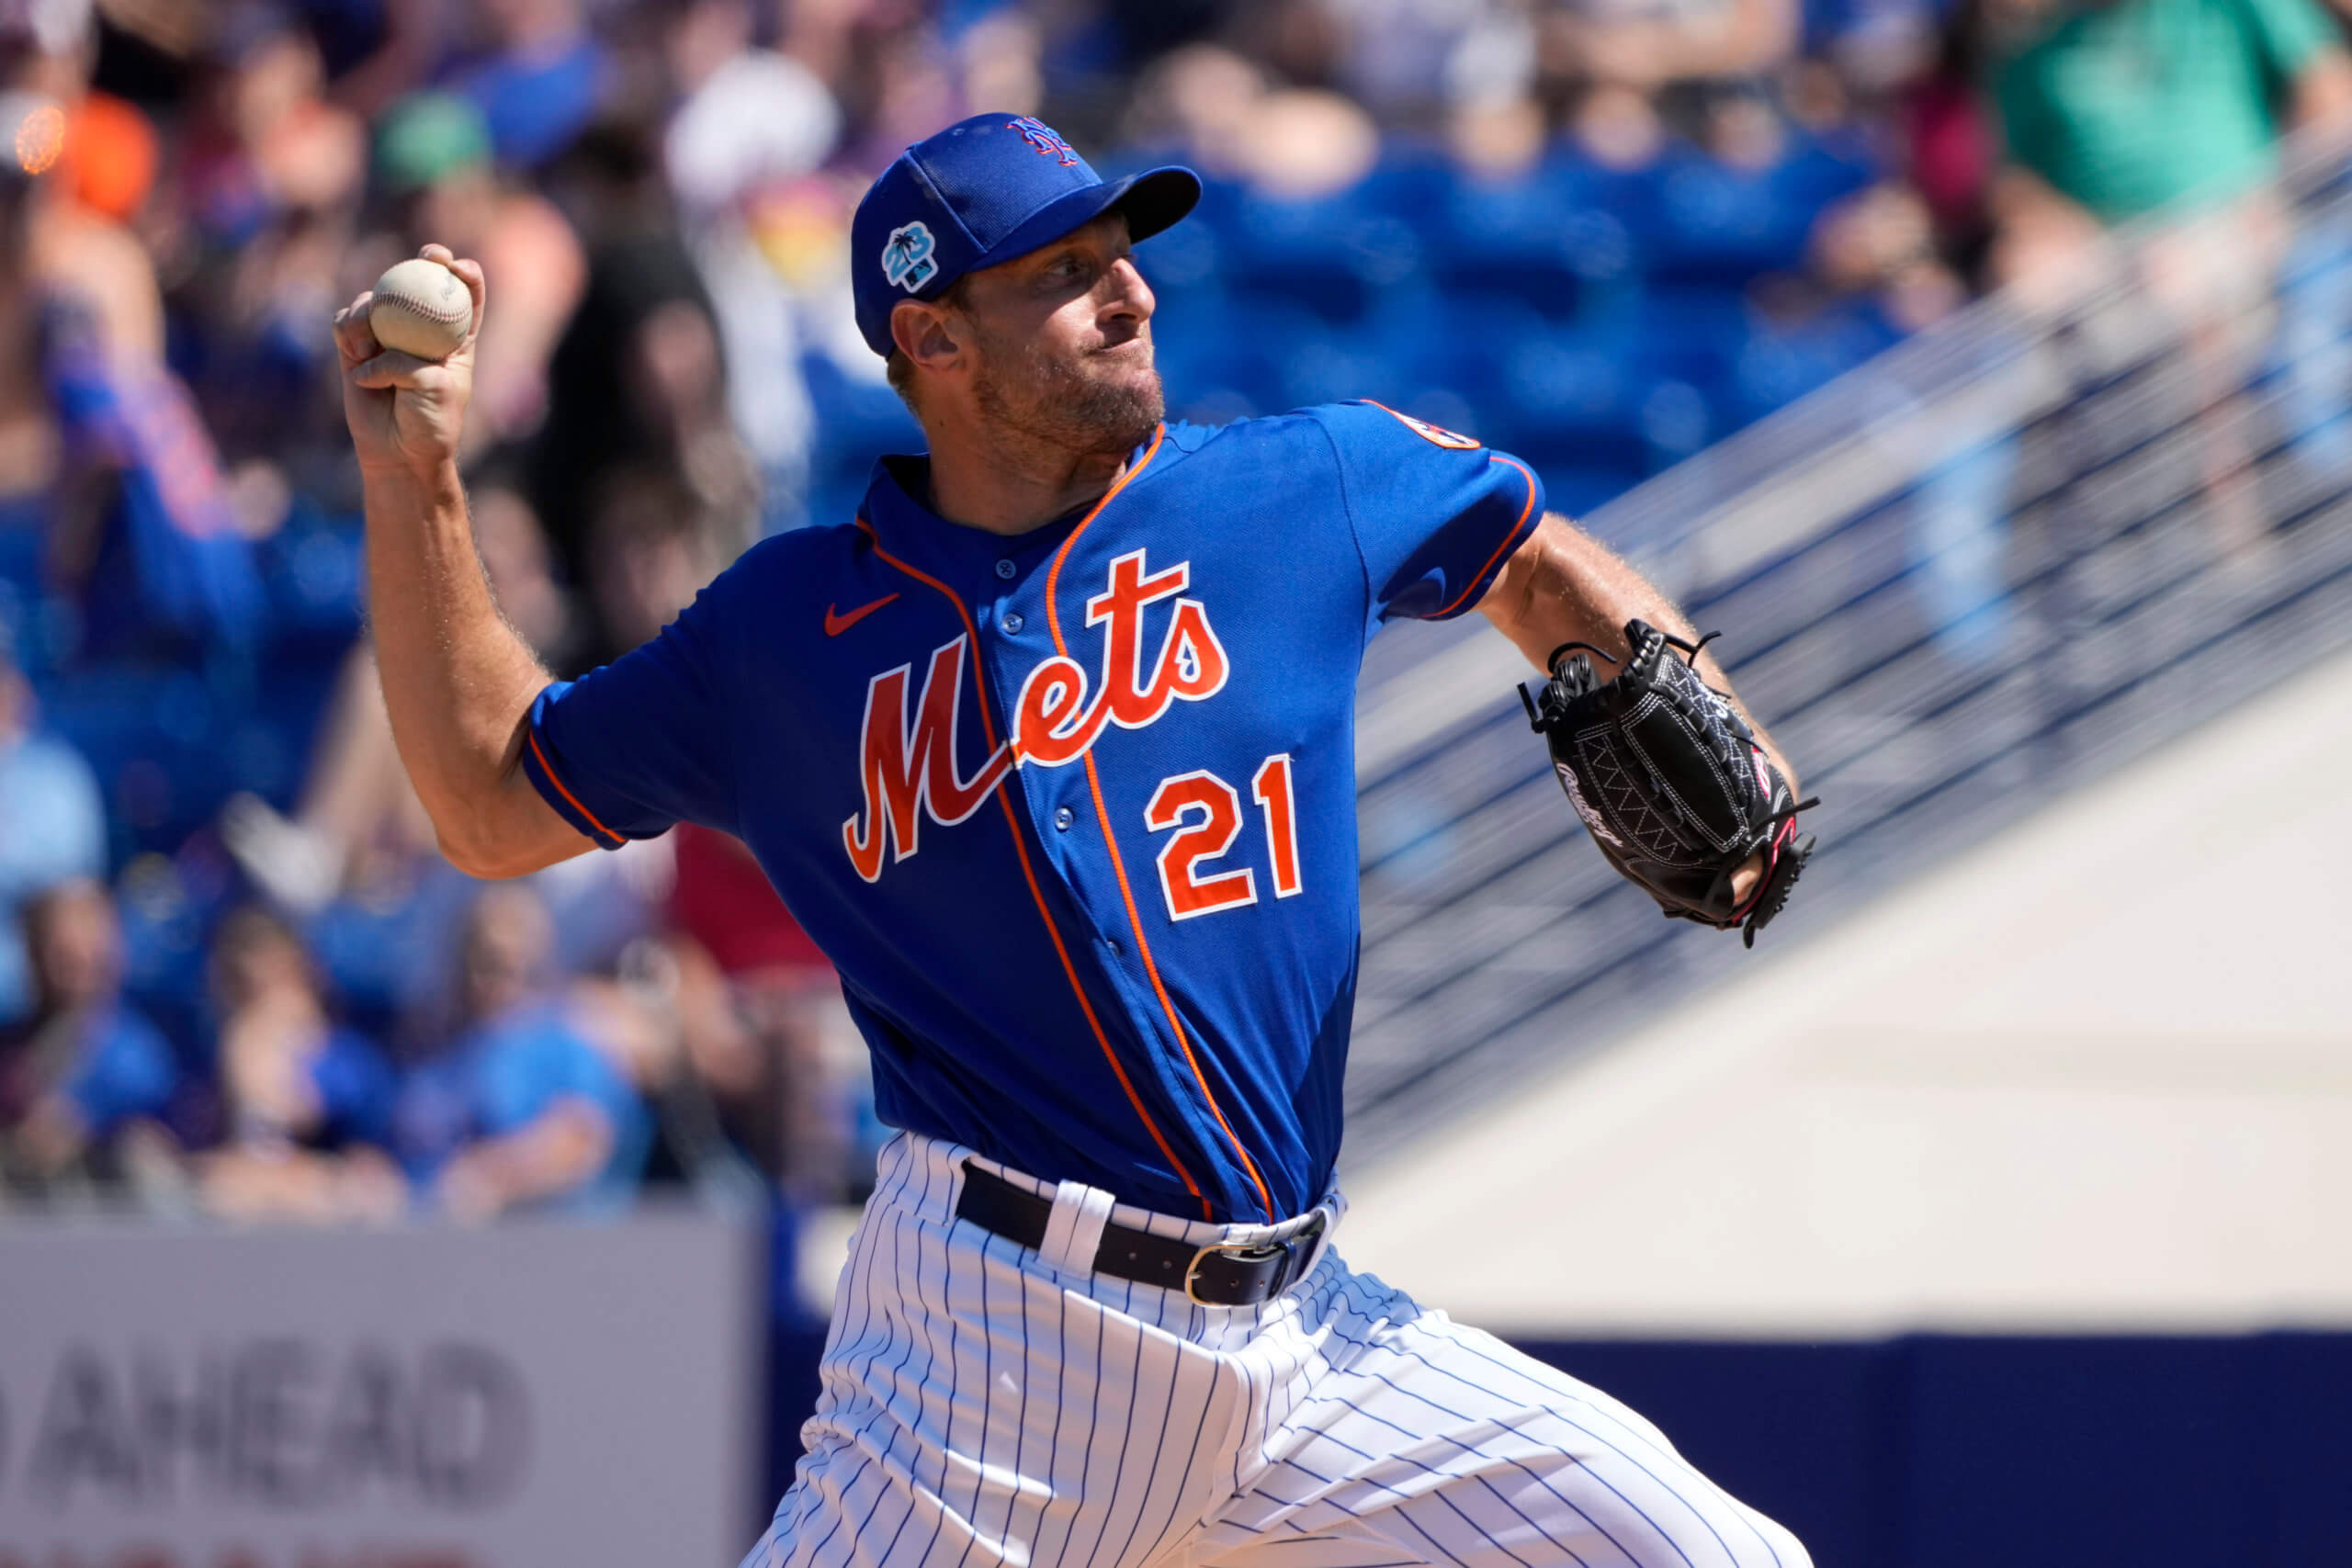 Mets lineup, starting rotation projections ahead of Opening Day 2023